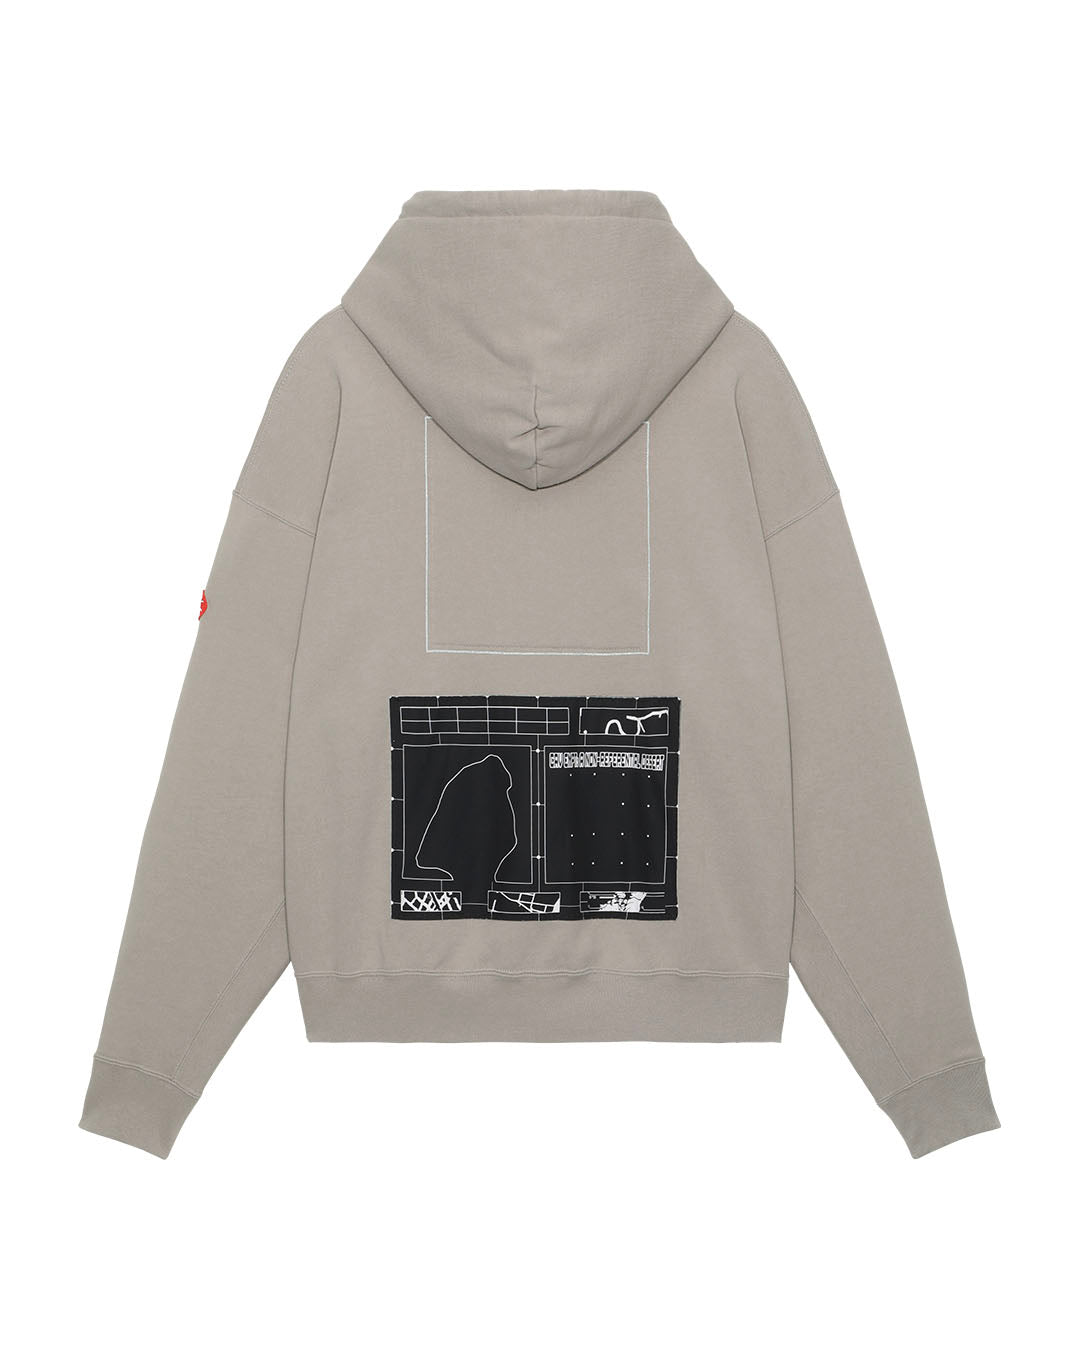 【C.E】STRICT EQUIVALENT TO HOODY - GREY